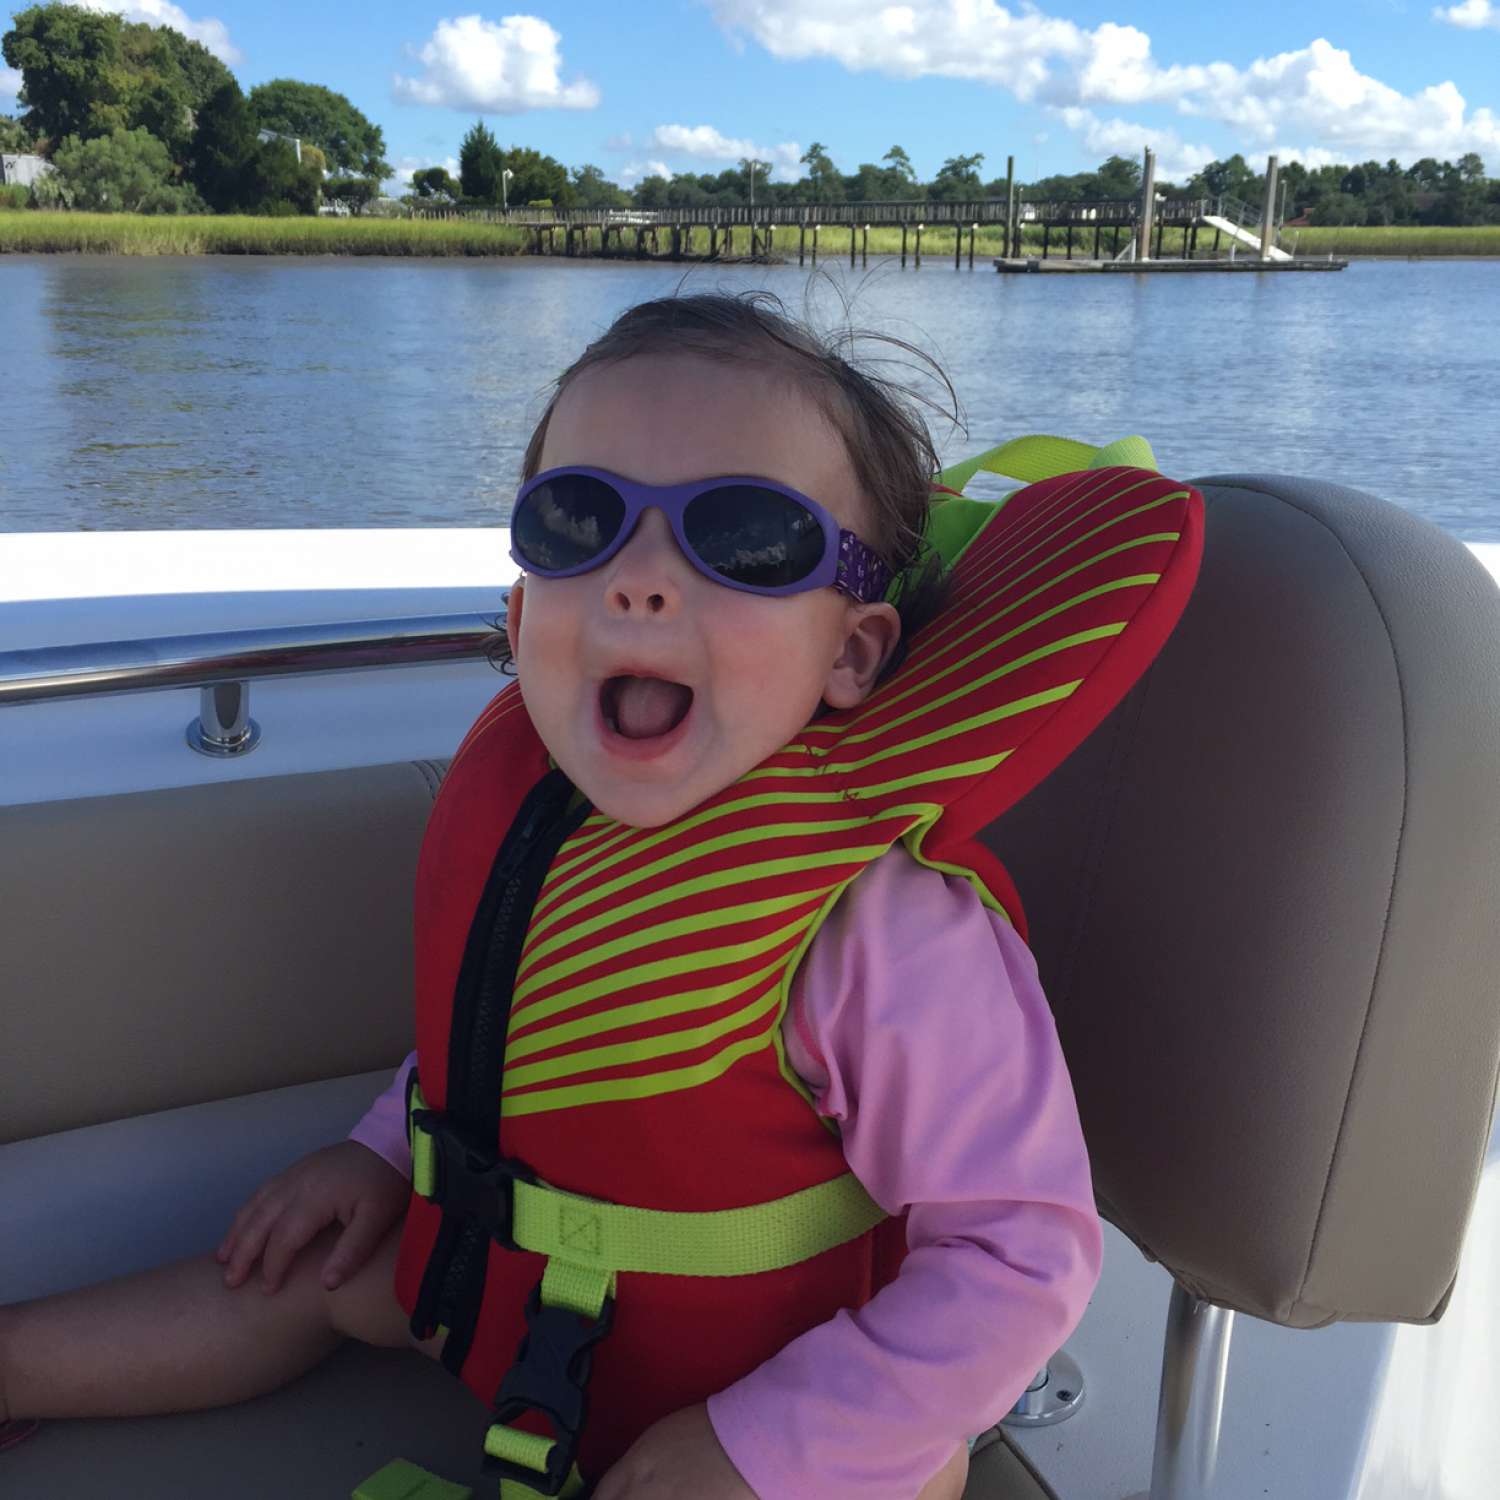 My photo was taken on the Stono River.  Letting my daughter enjoy her new boat.